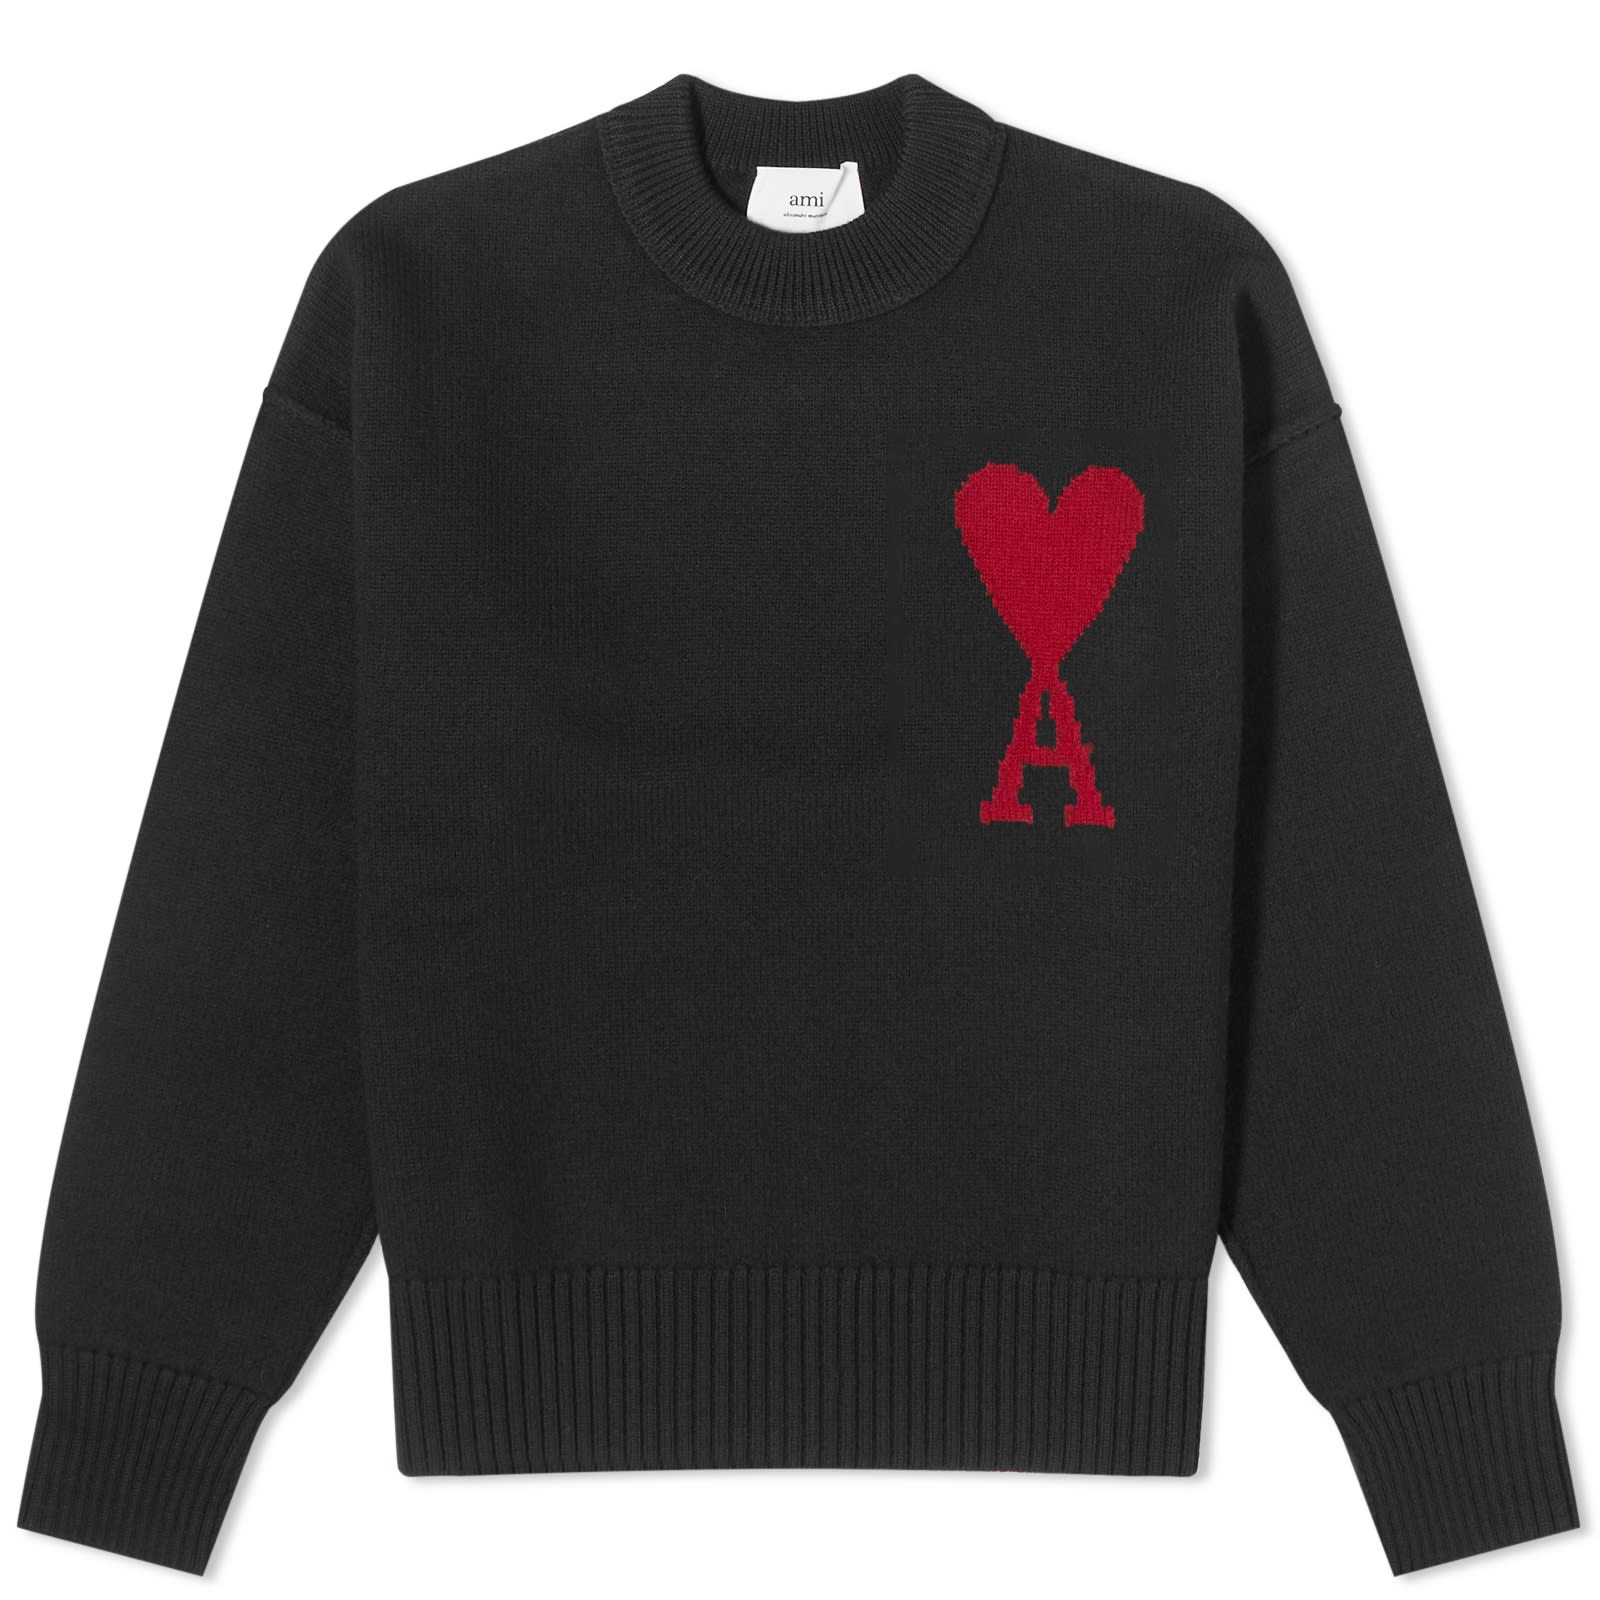 AMI ADC Large Crew Knit Sweater - 1